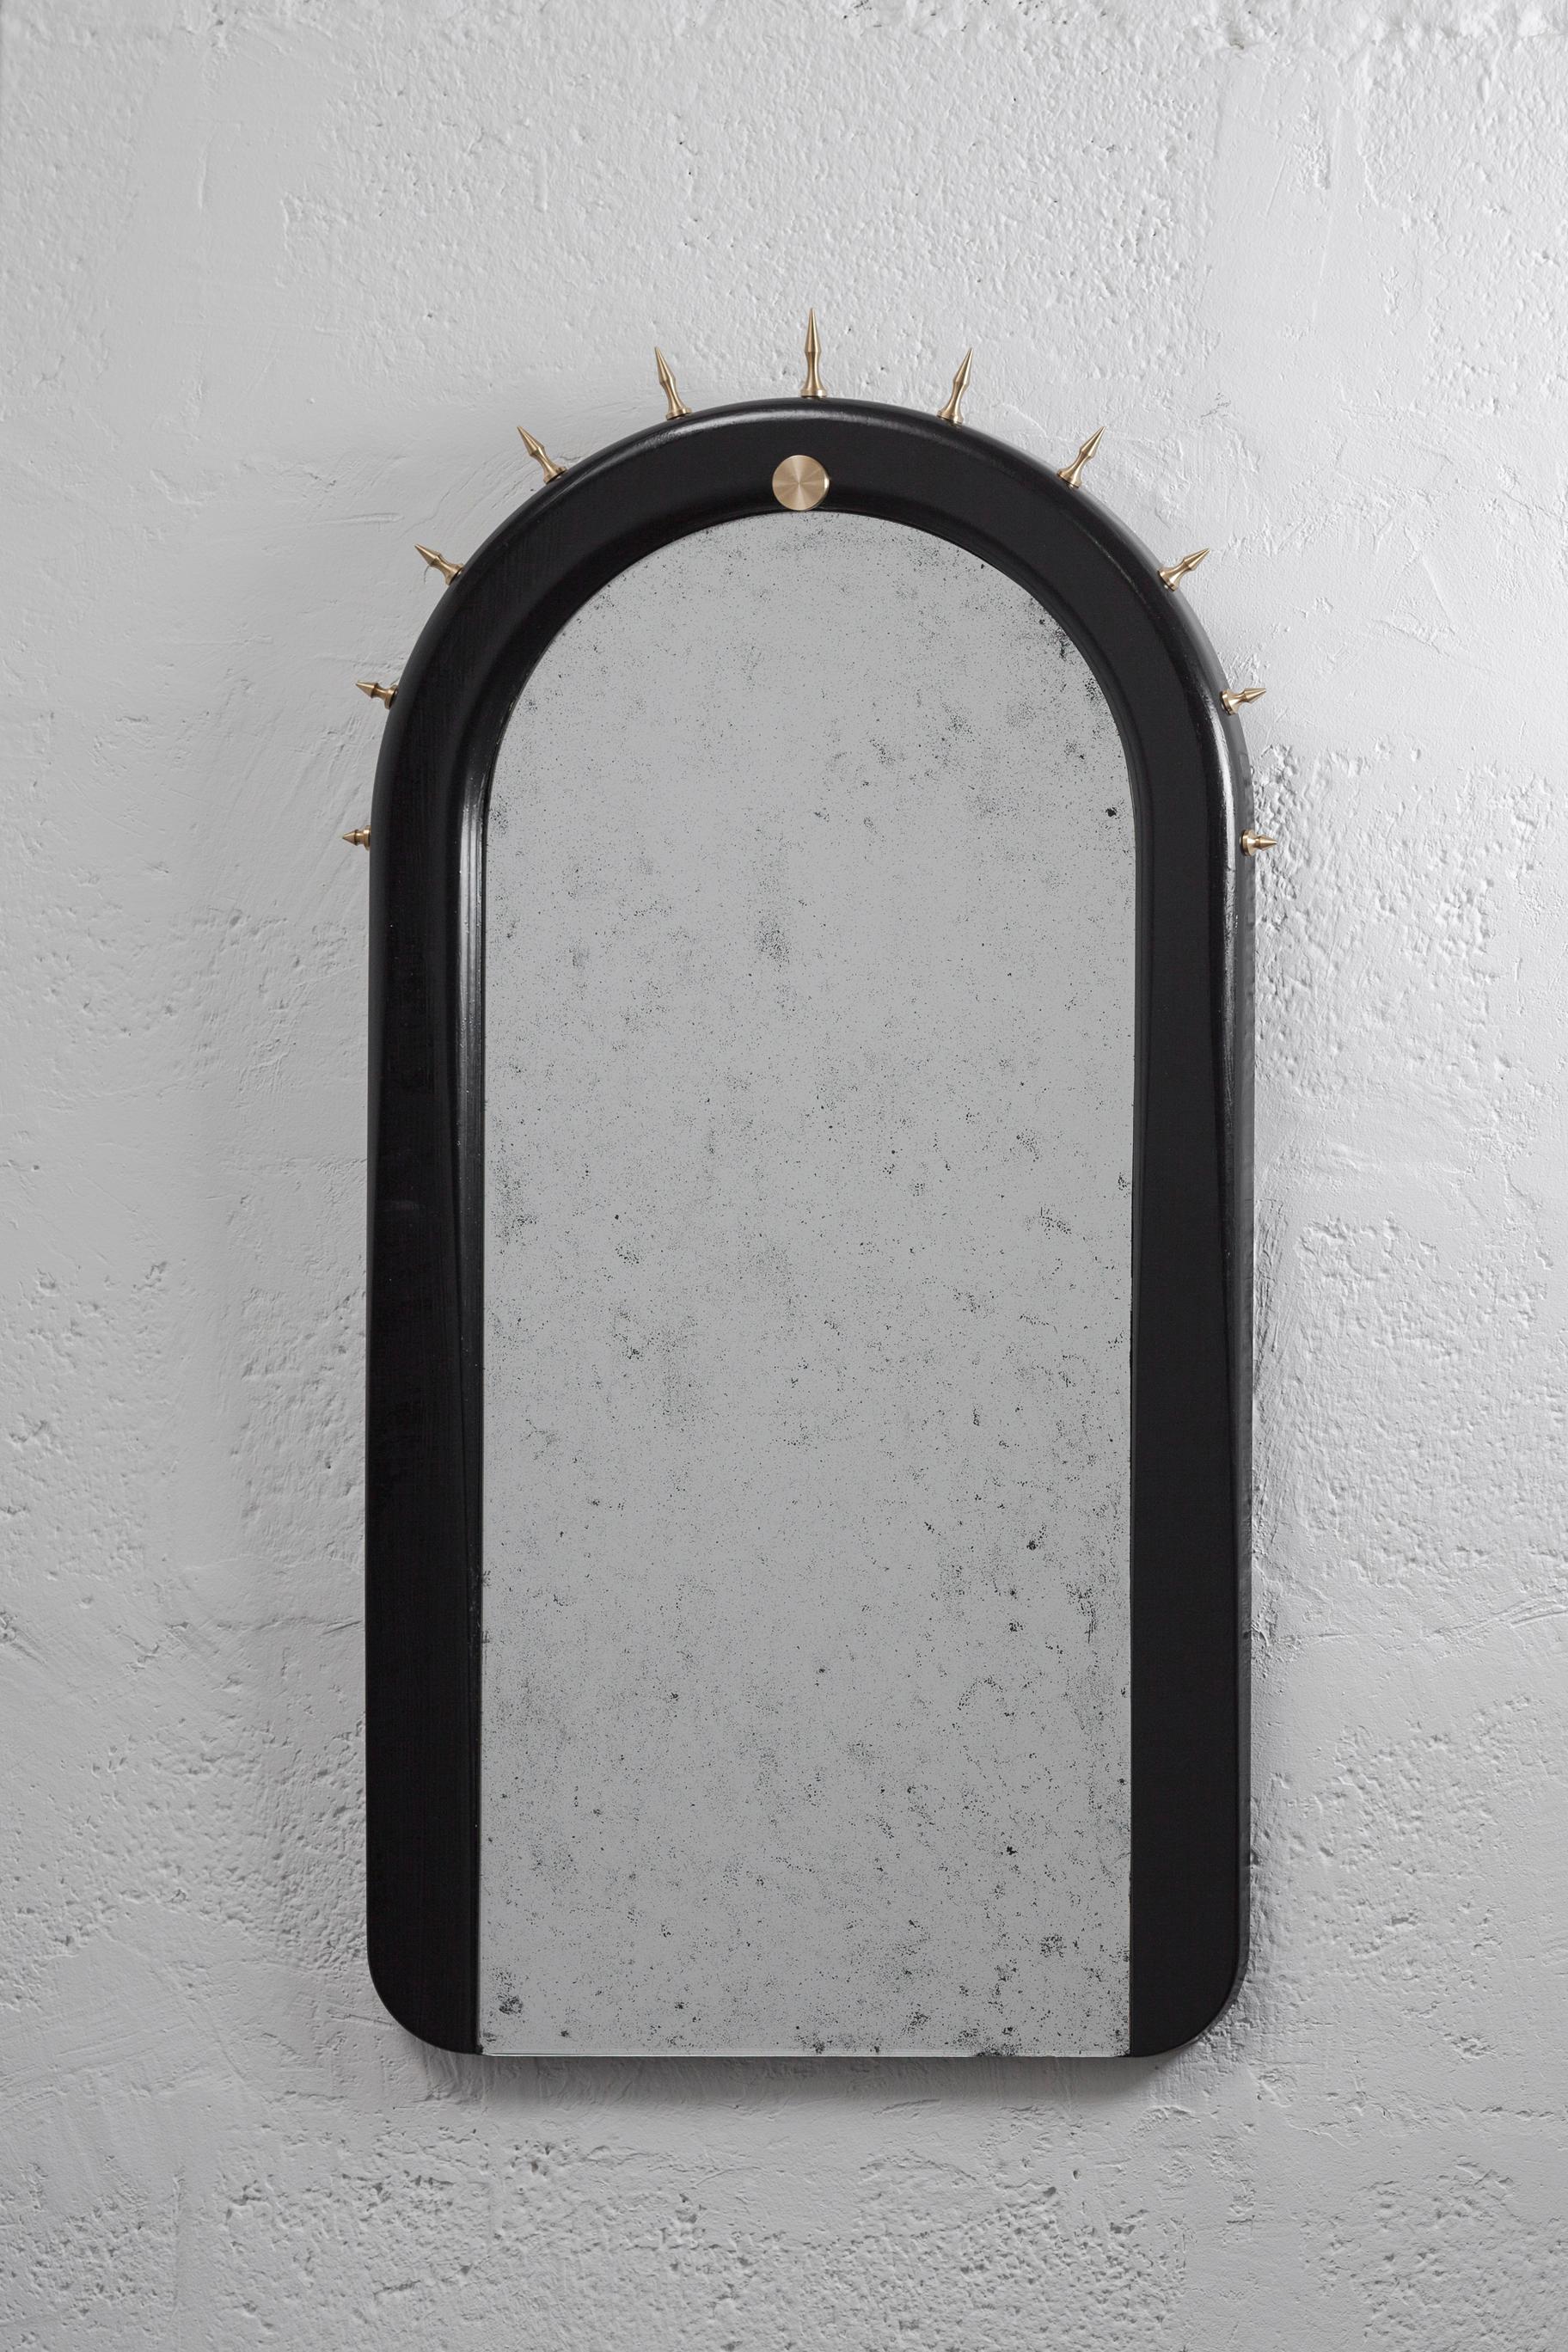 Sitiera_01 Wall Mirror in Solid Wood by ANDEAN, Represented by Tuleste Factory For Sale 2